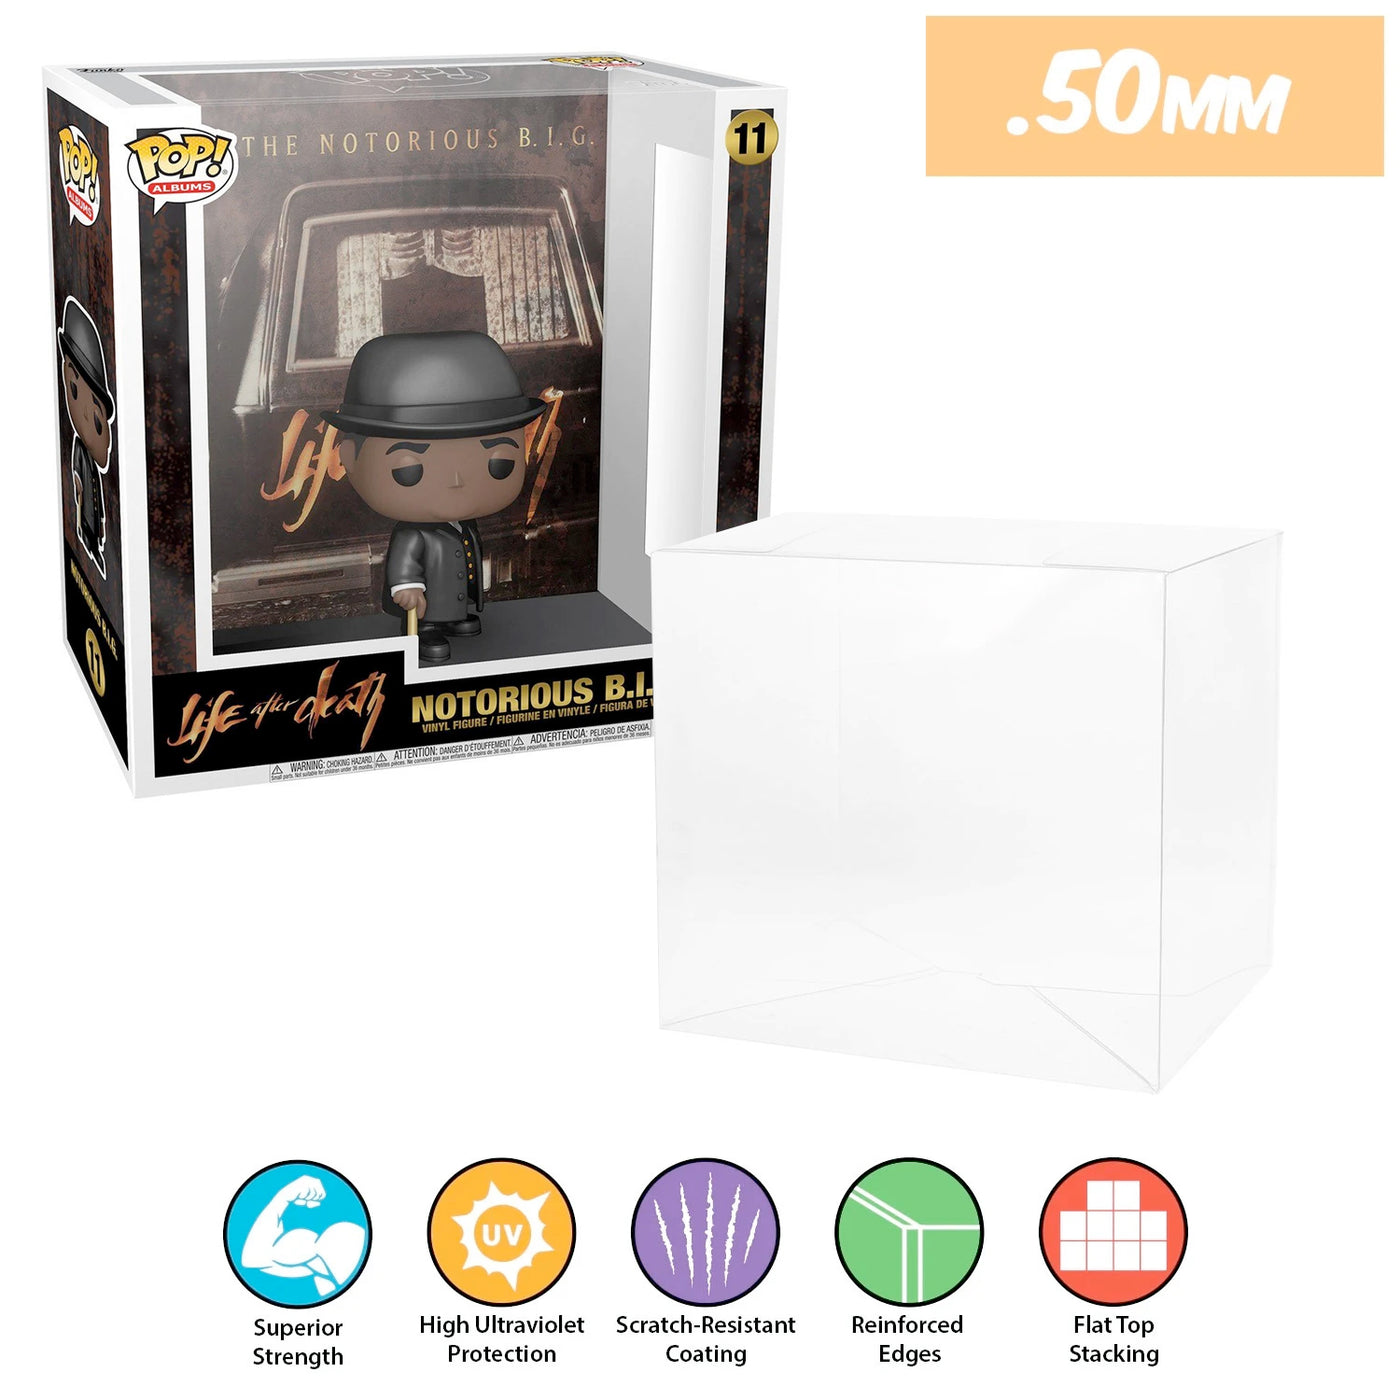 11 notorious big life after death pop albums best funko pop protectors thick strong uv scratch flat top stack vinyl display geek plastic shield vaulted eco armor fits collect protect display case kollector protector